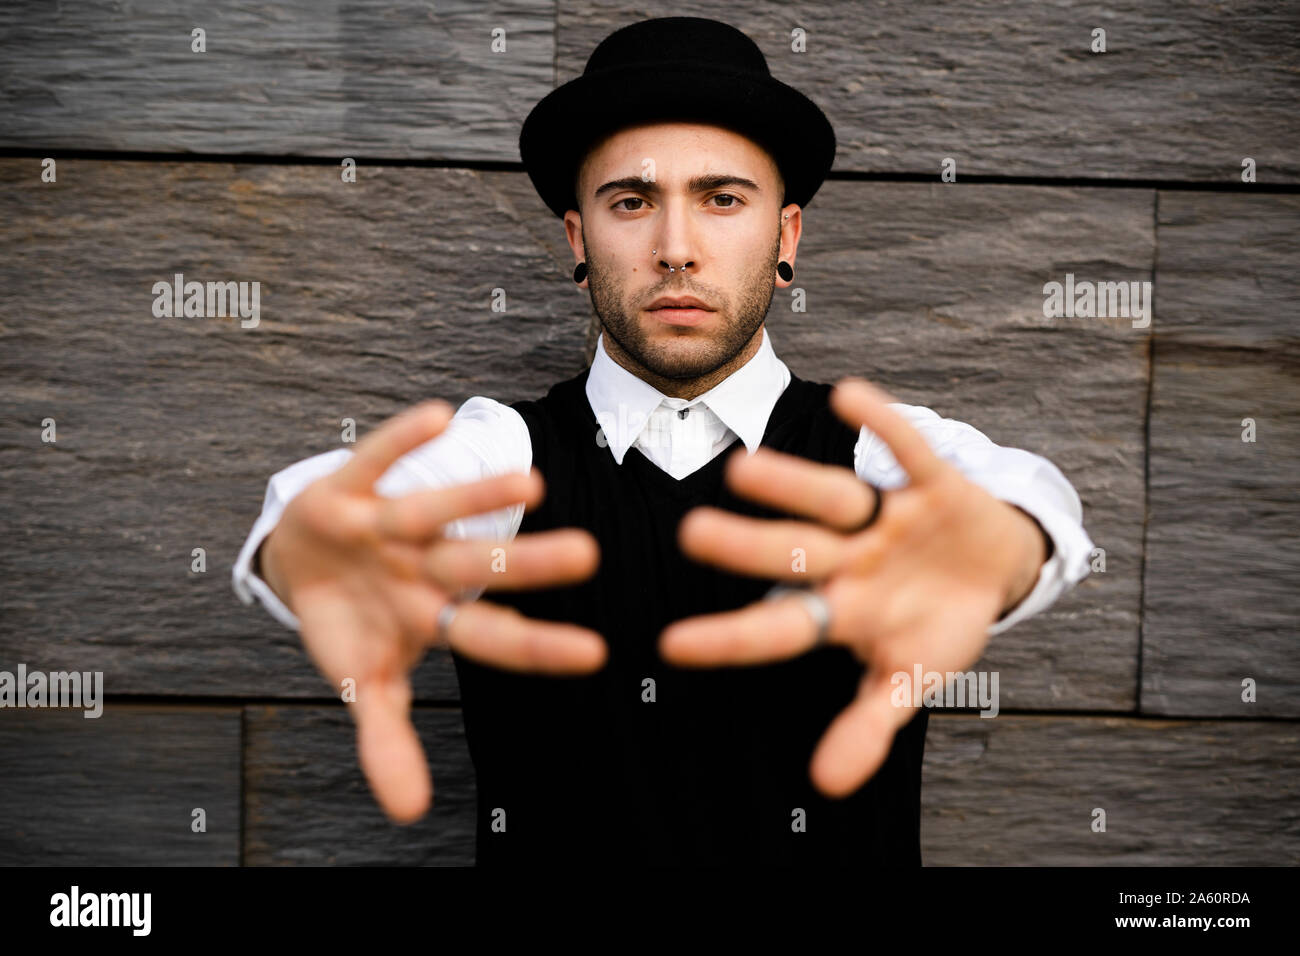 Portrait of serious young man with nose piercing and earrings raising hands Stock Photo